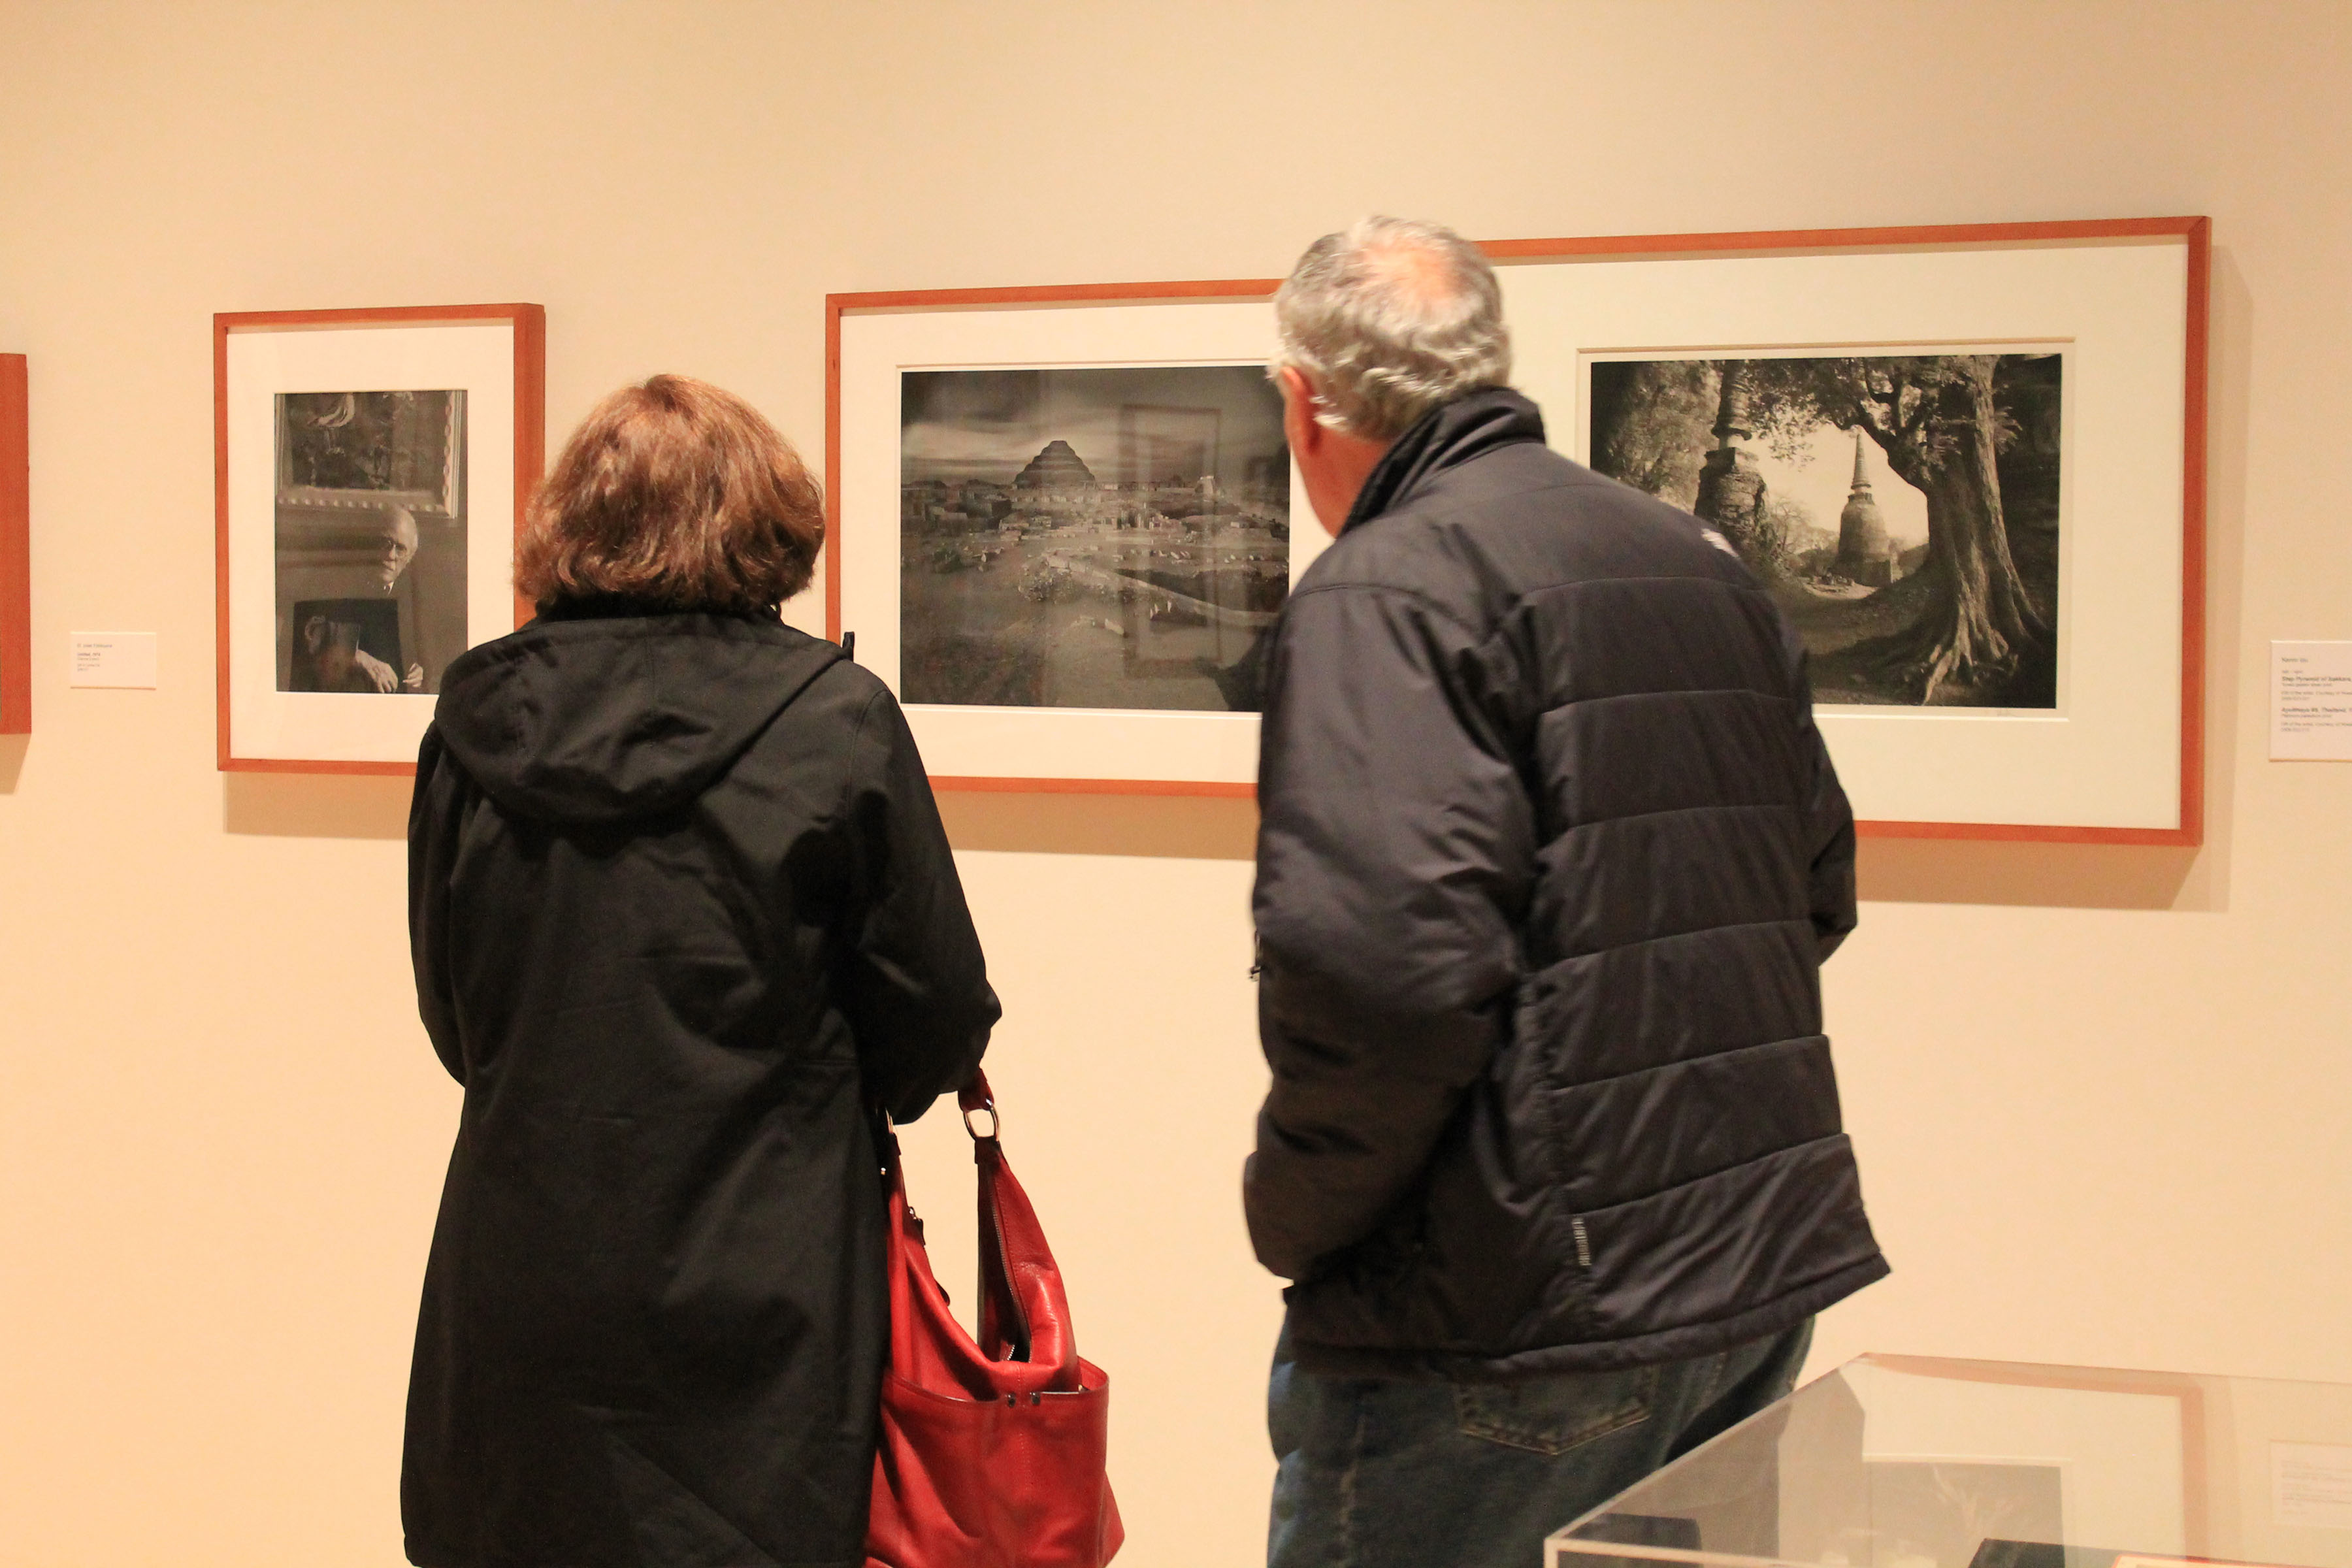 Photography on display welcomed observation and discussion. Photo by Audrey Brand